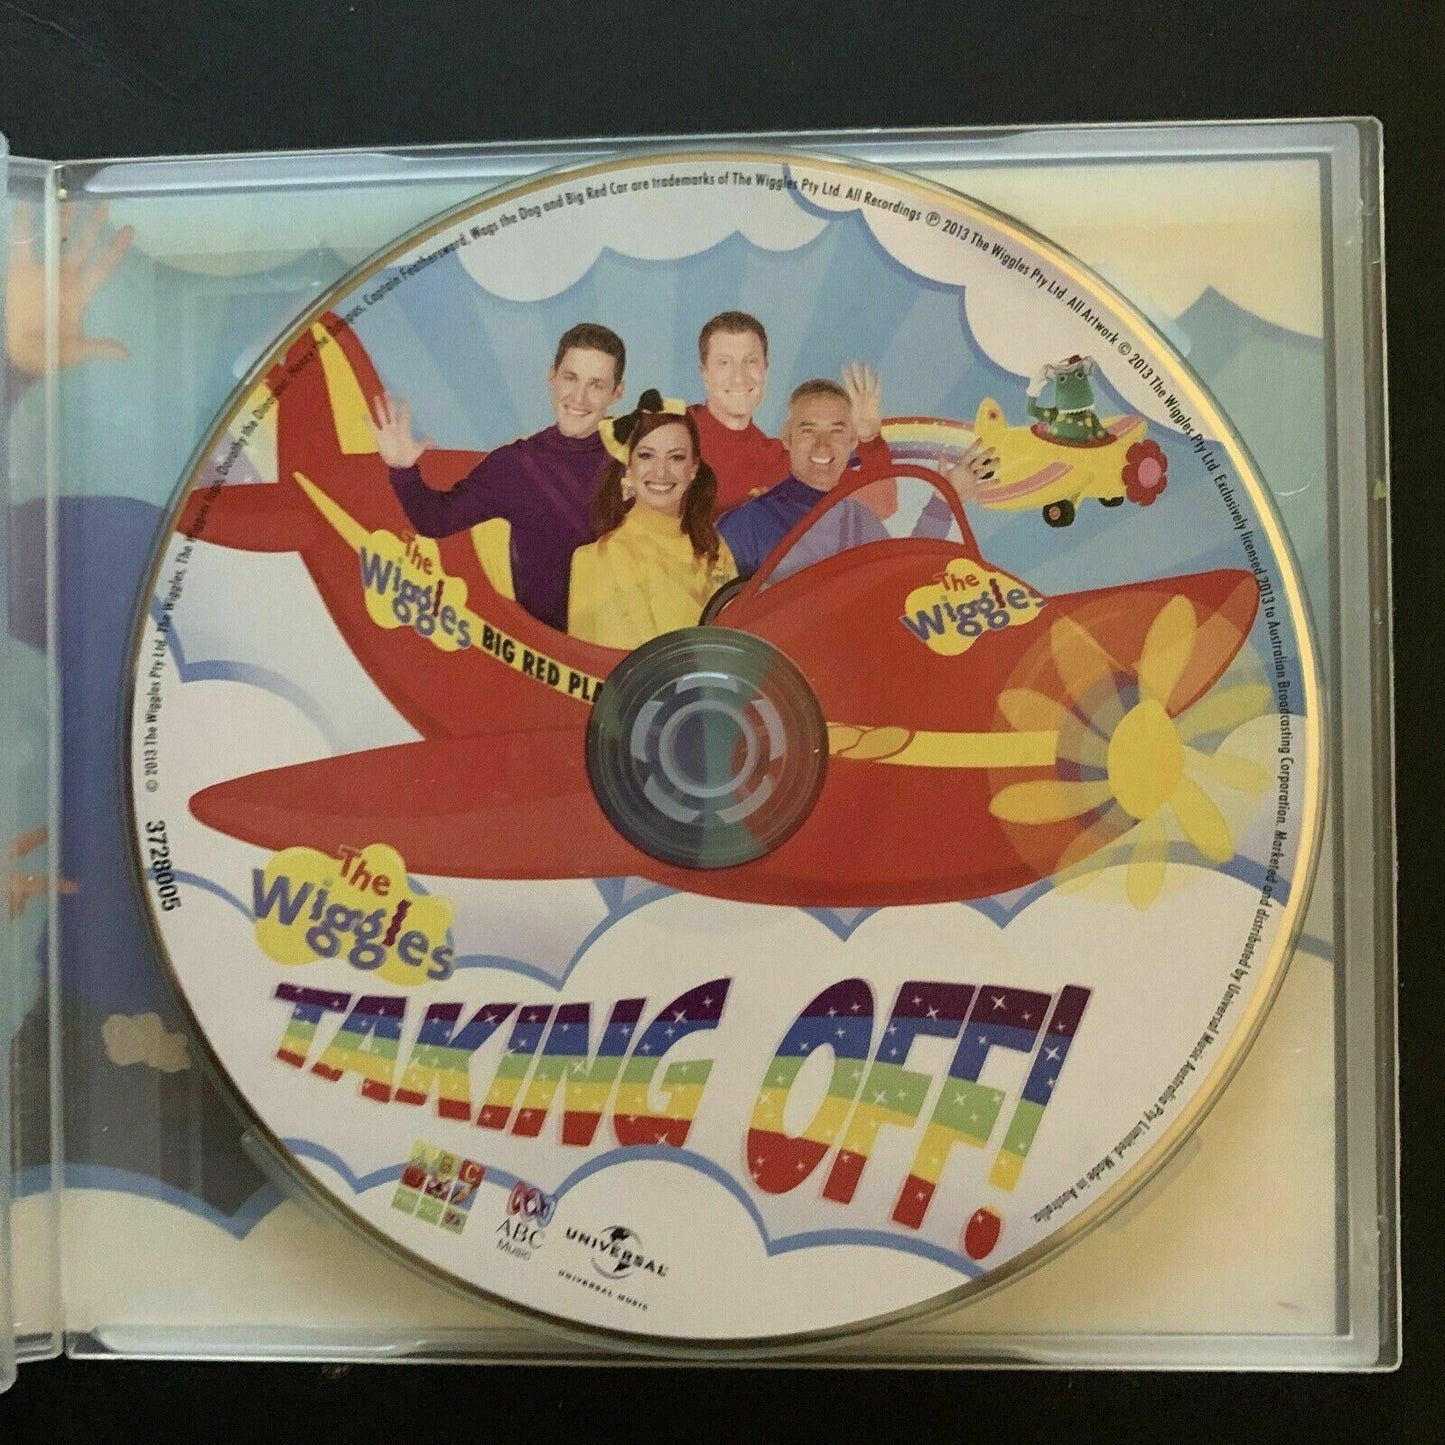 Taking Off! by The Wiggles (CD, 2013, ABC)